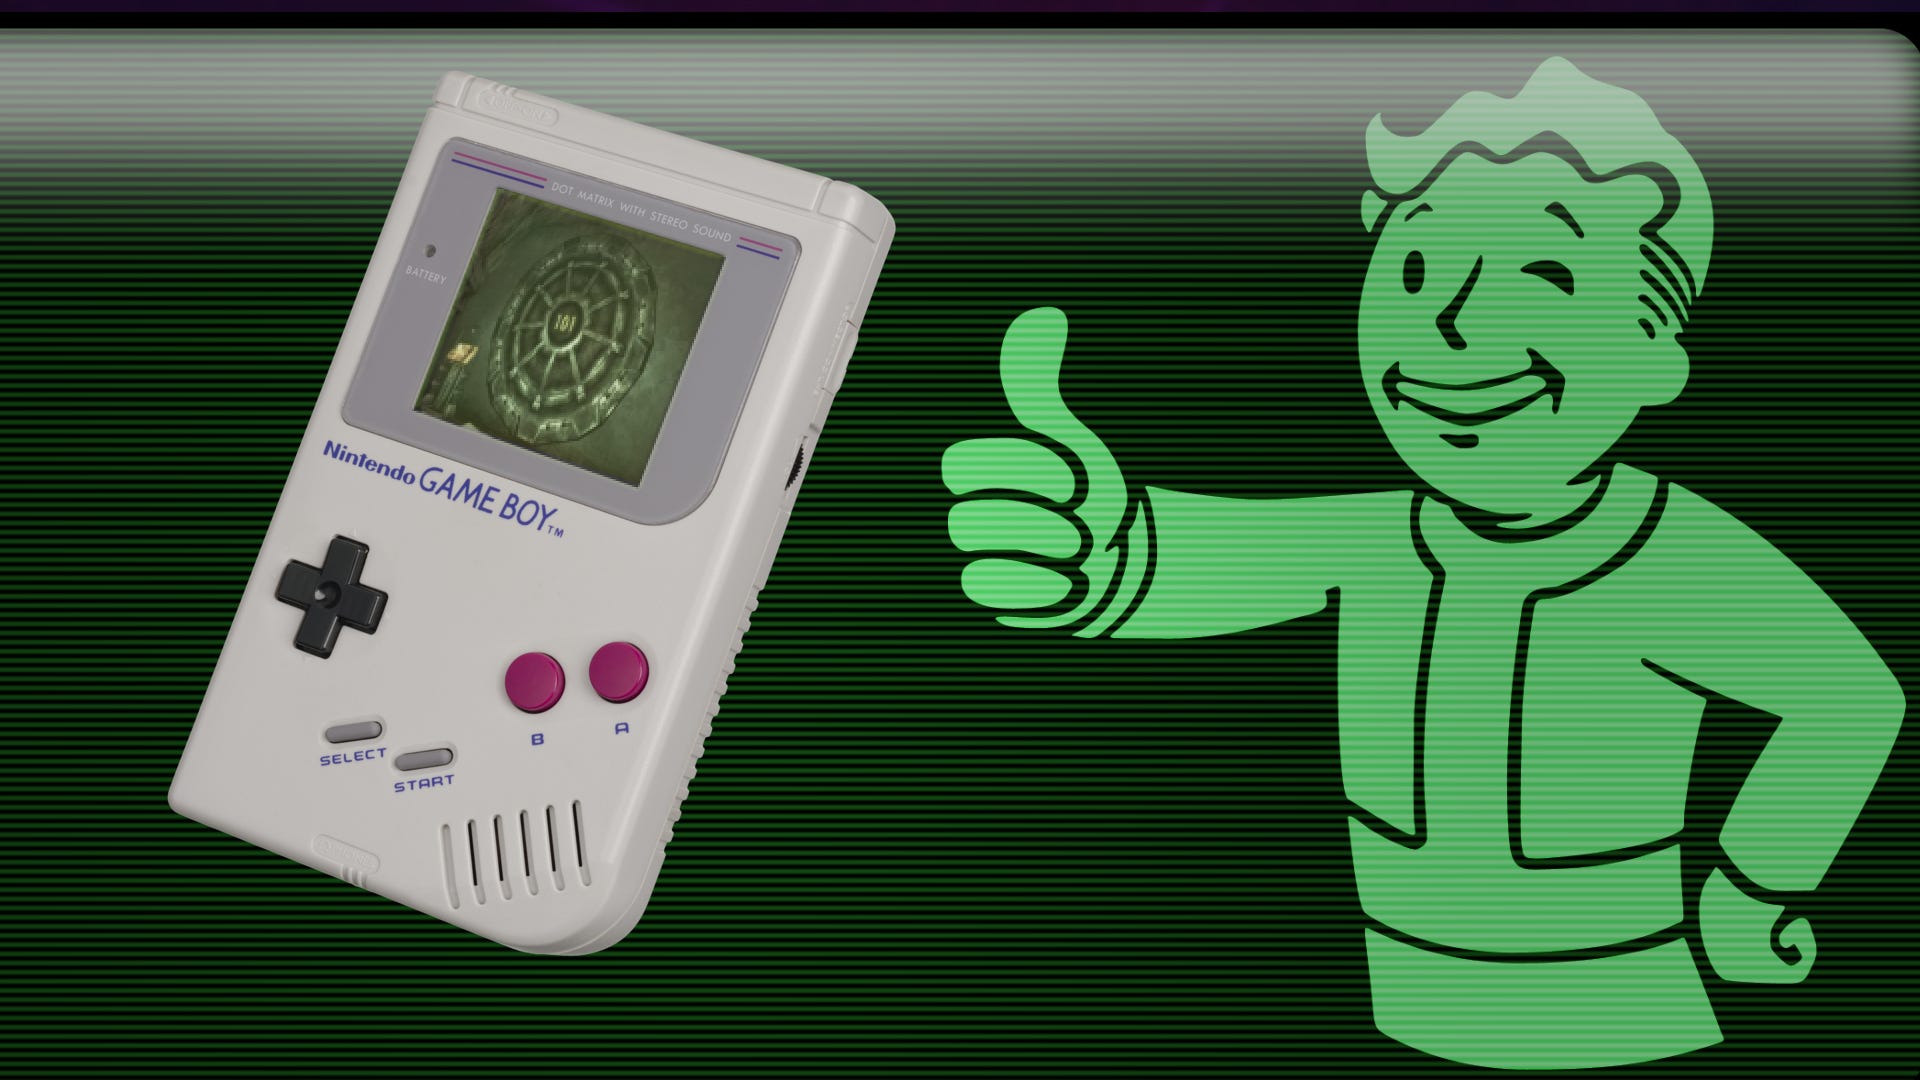 Waiting for Fallout 4’s next-gen update to drop? Here’s a cool fan demake of Fallout 3’s intro on the Gameboy to check out